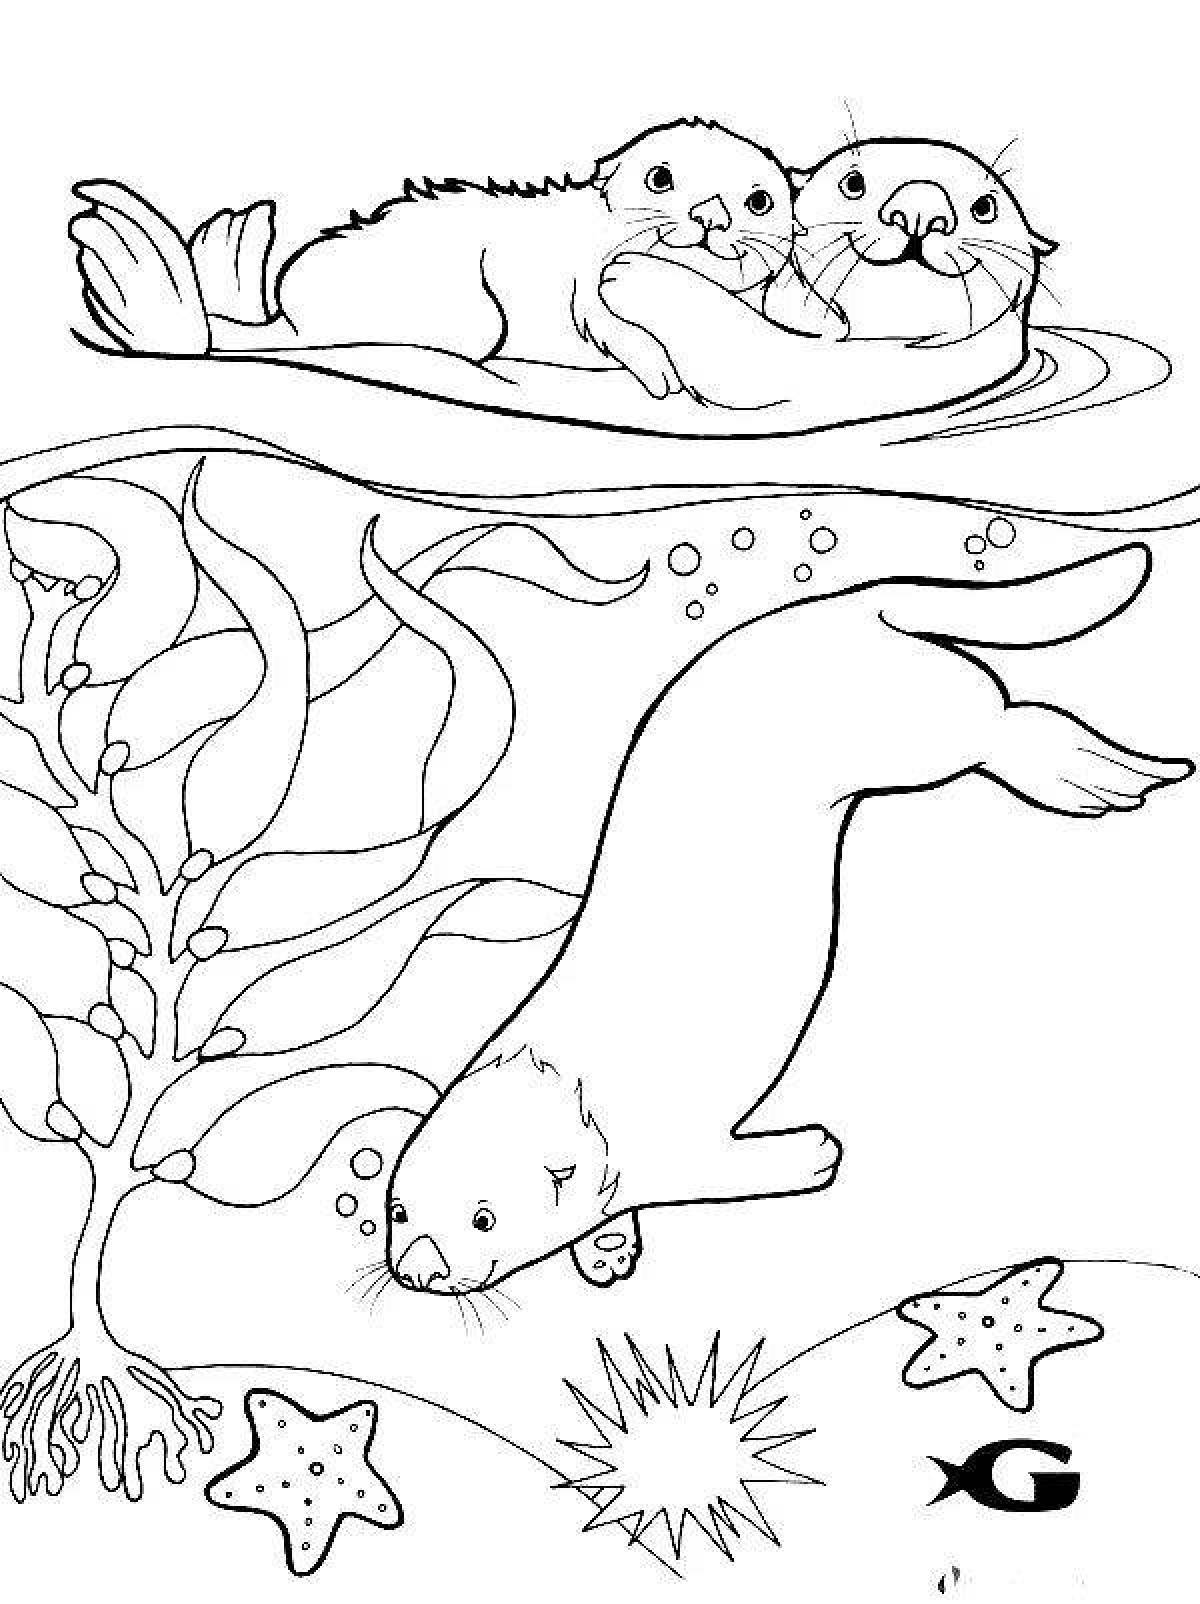 Coloring page beckoning river otter